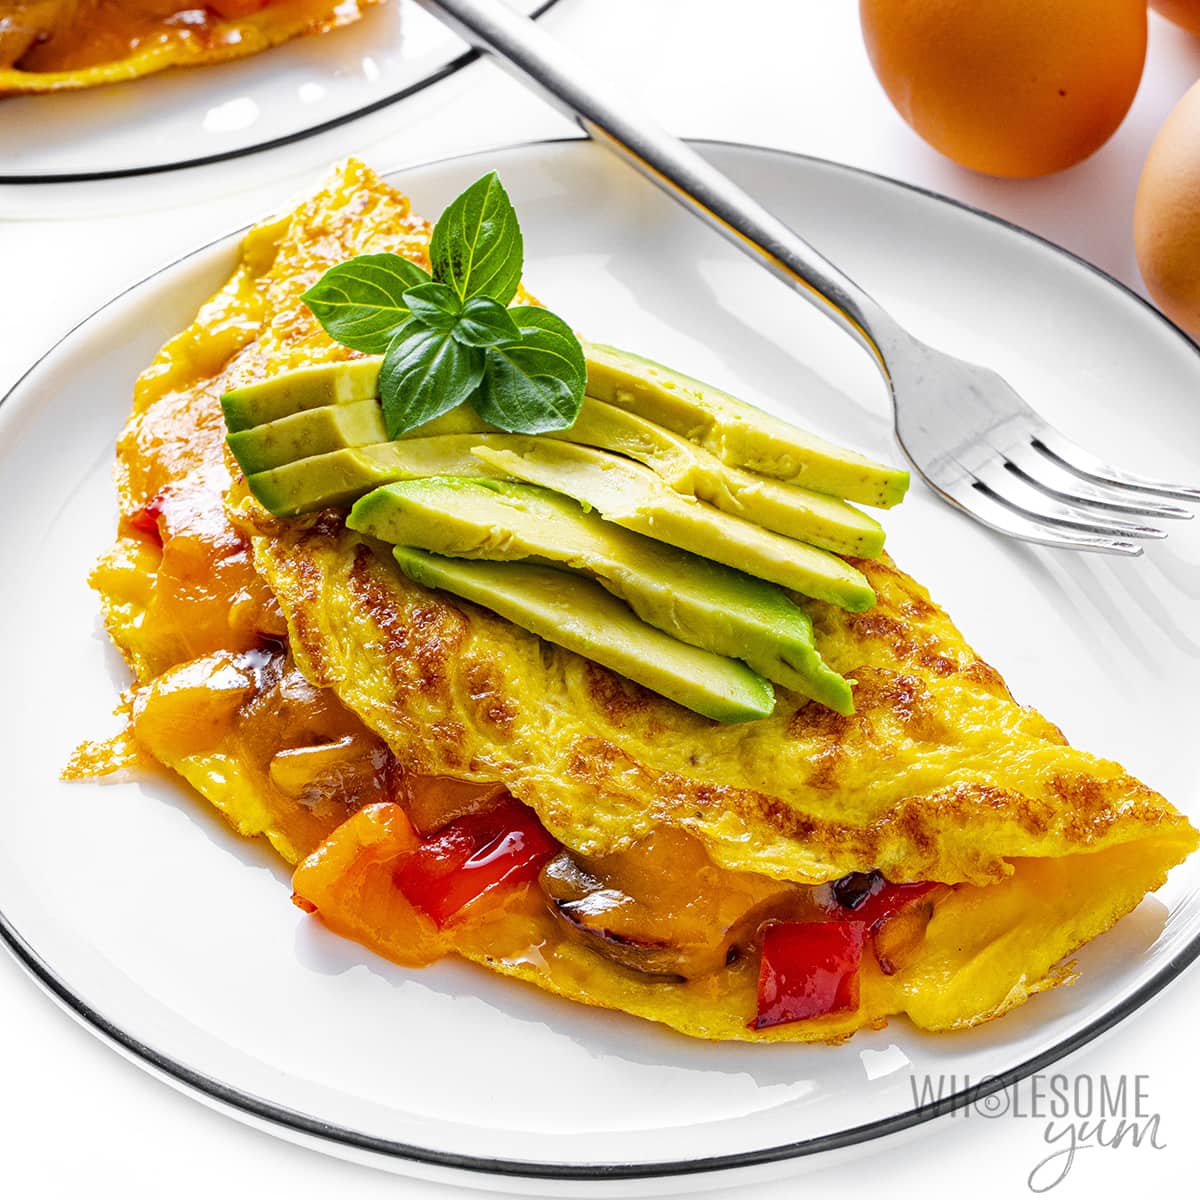 Recipe: Oven-Baked Omelet with Broccoli, Asparagus, and Tons of